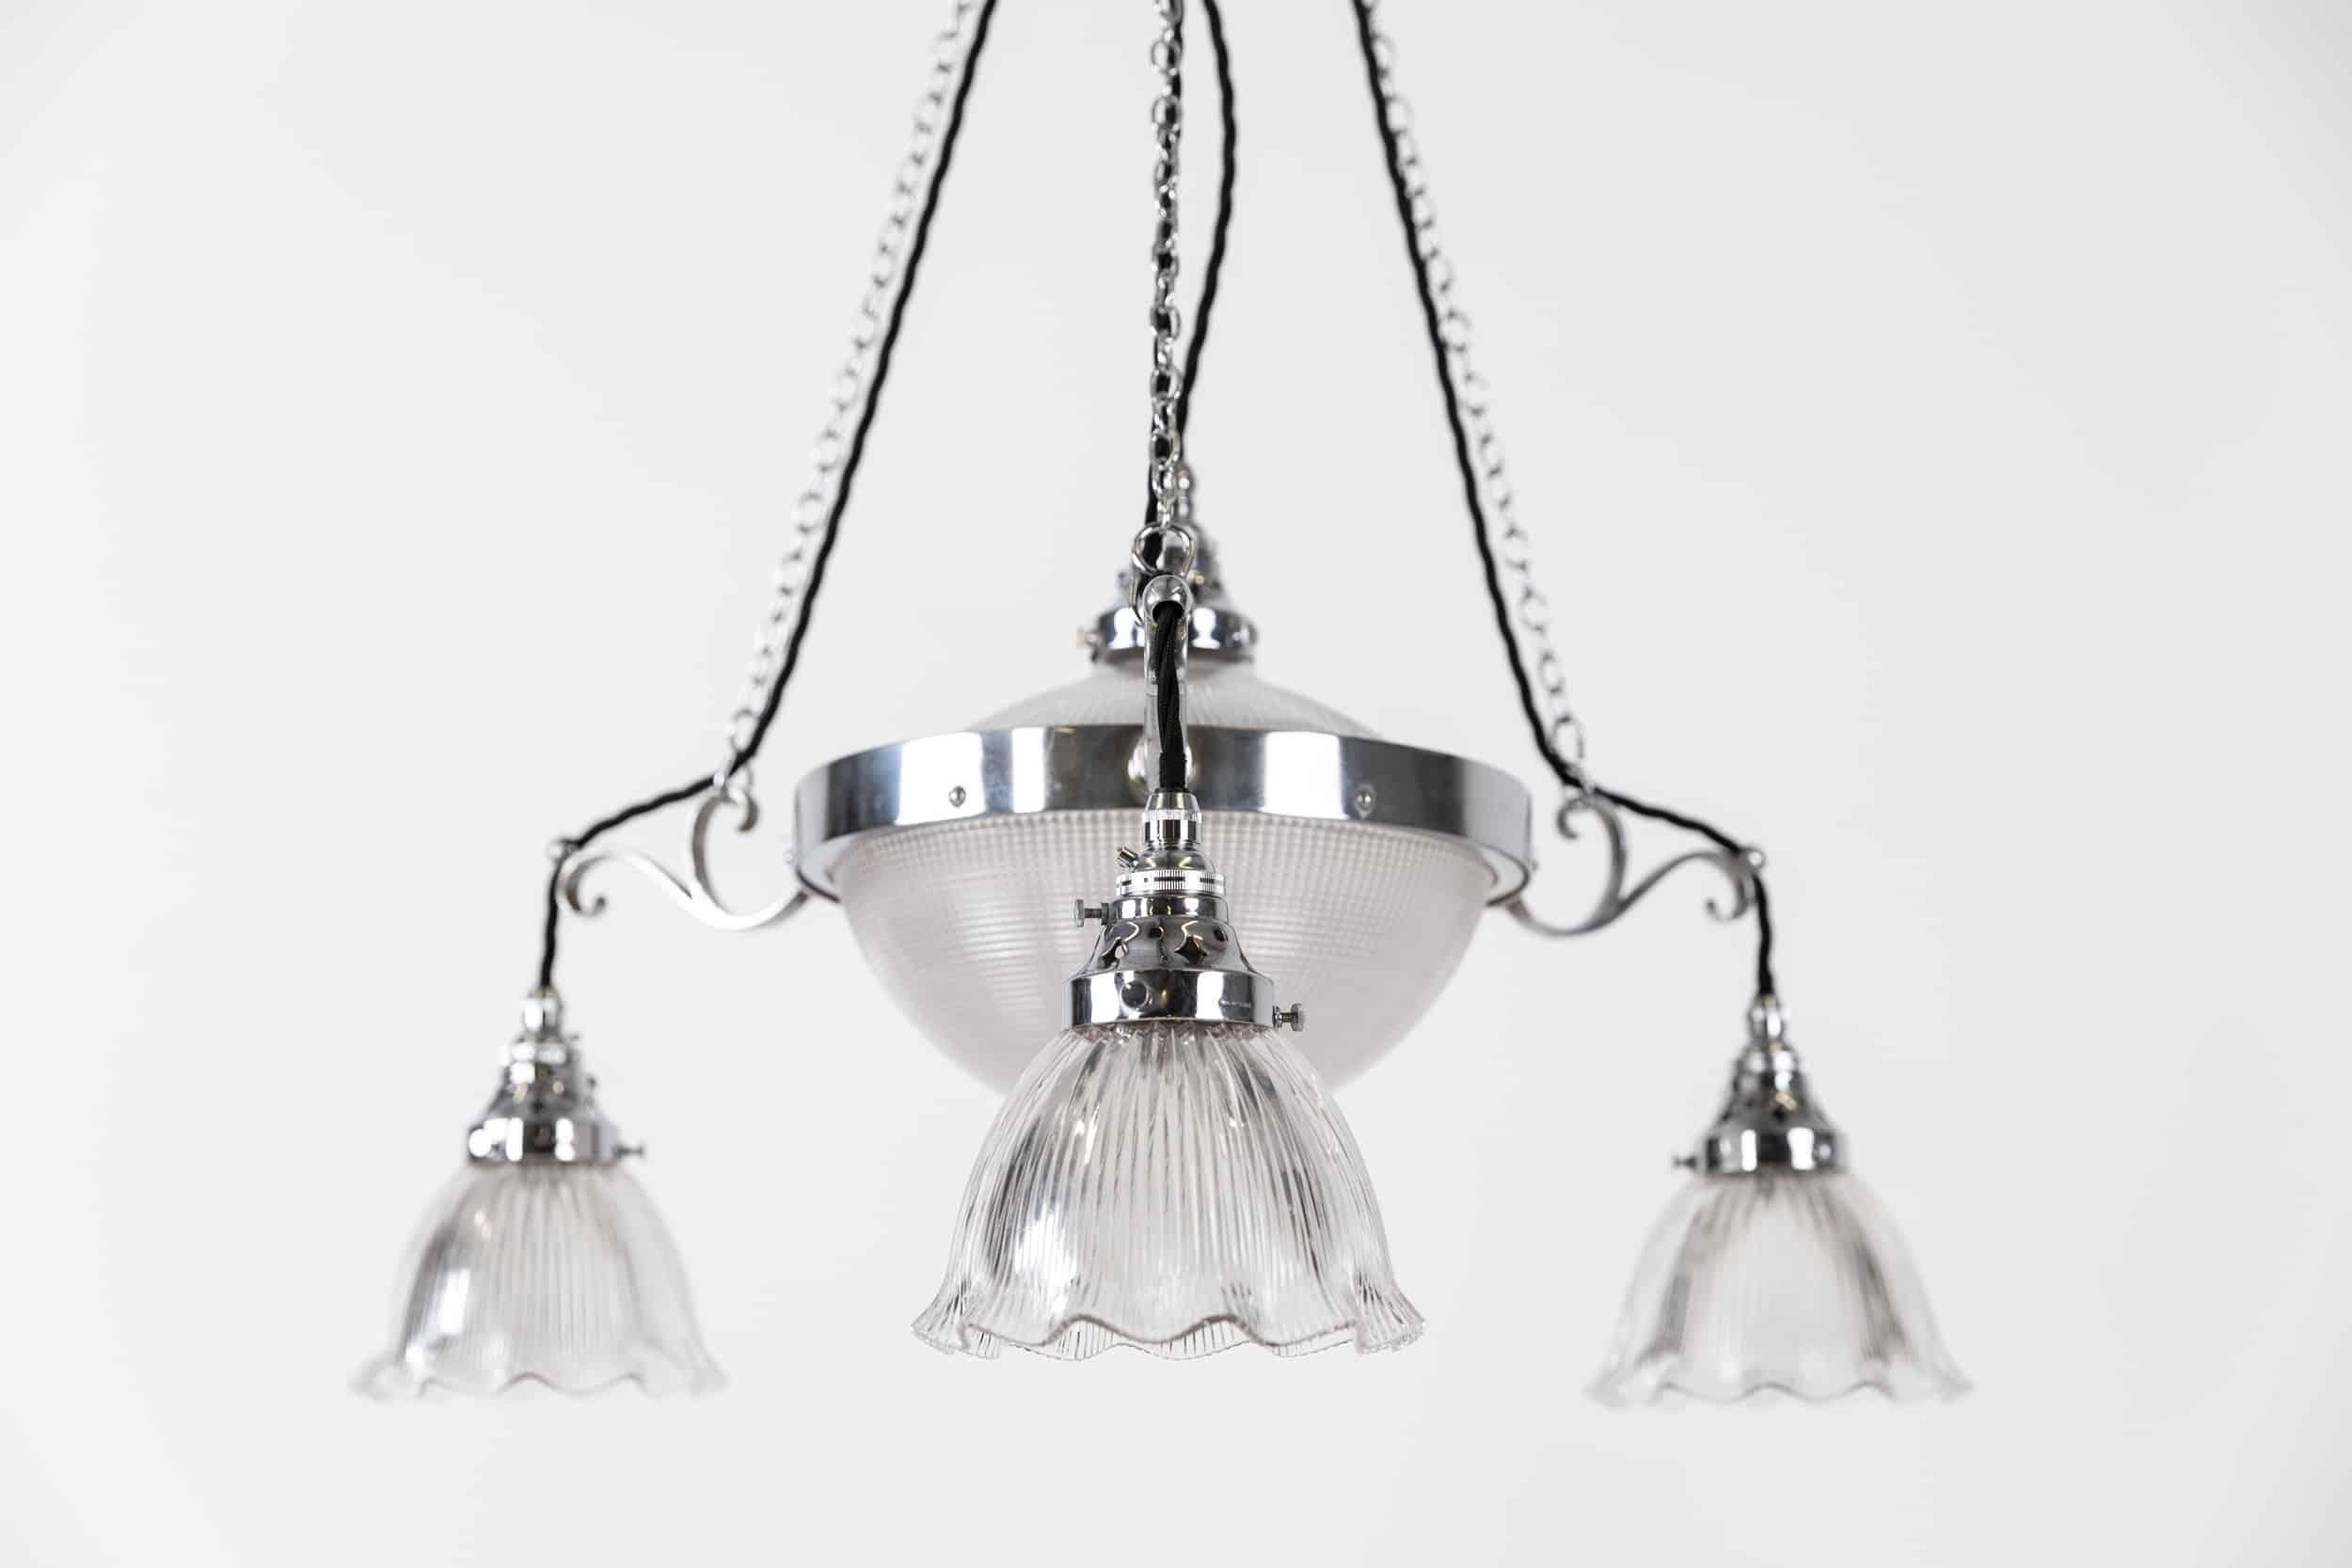 Antique Holophane 'Stiletto' Prismatic Glass Chandelier Light, C.1915 In Fair Condition For Sale In London, GB